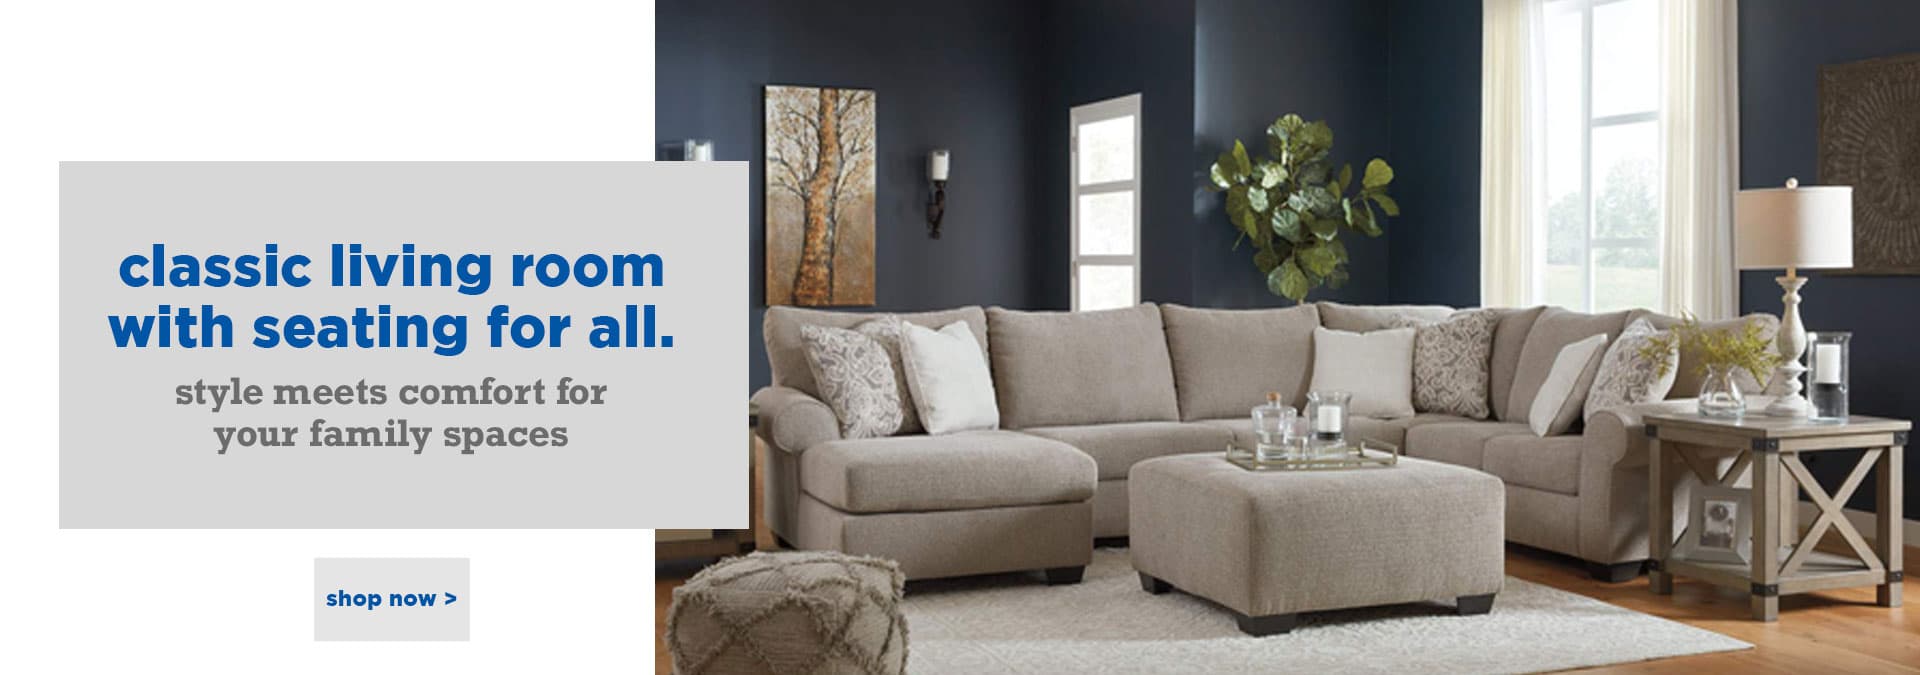 classic living room with seating for all. style meets comfort for your family spaces. shop now